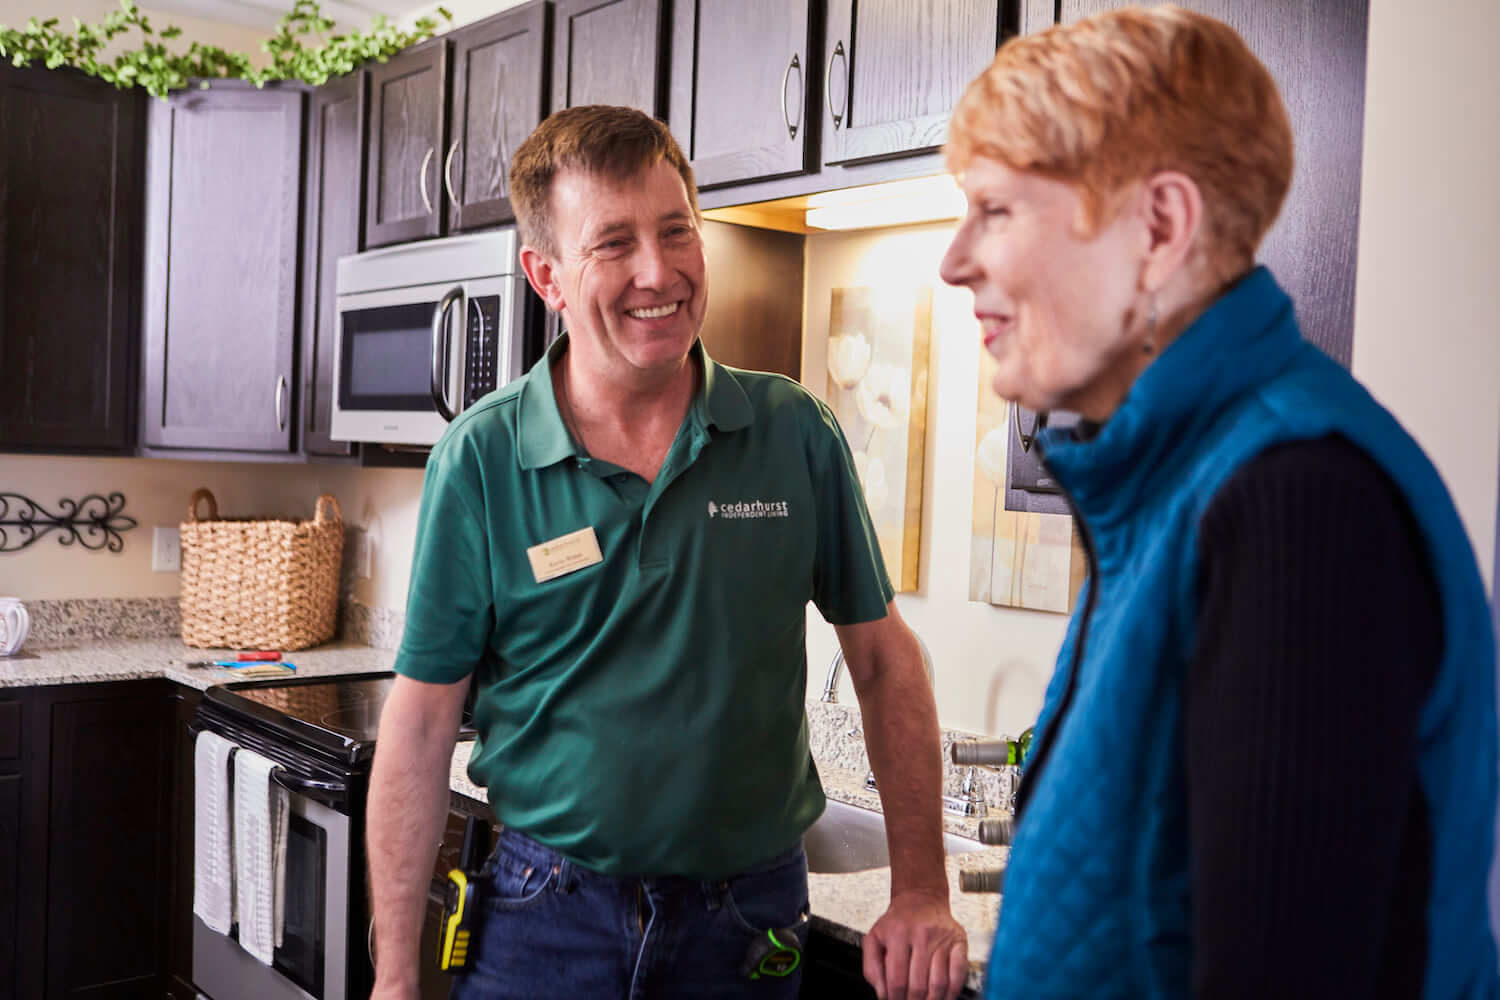 A team member chatting in a kitchen with a resident